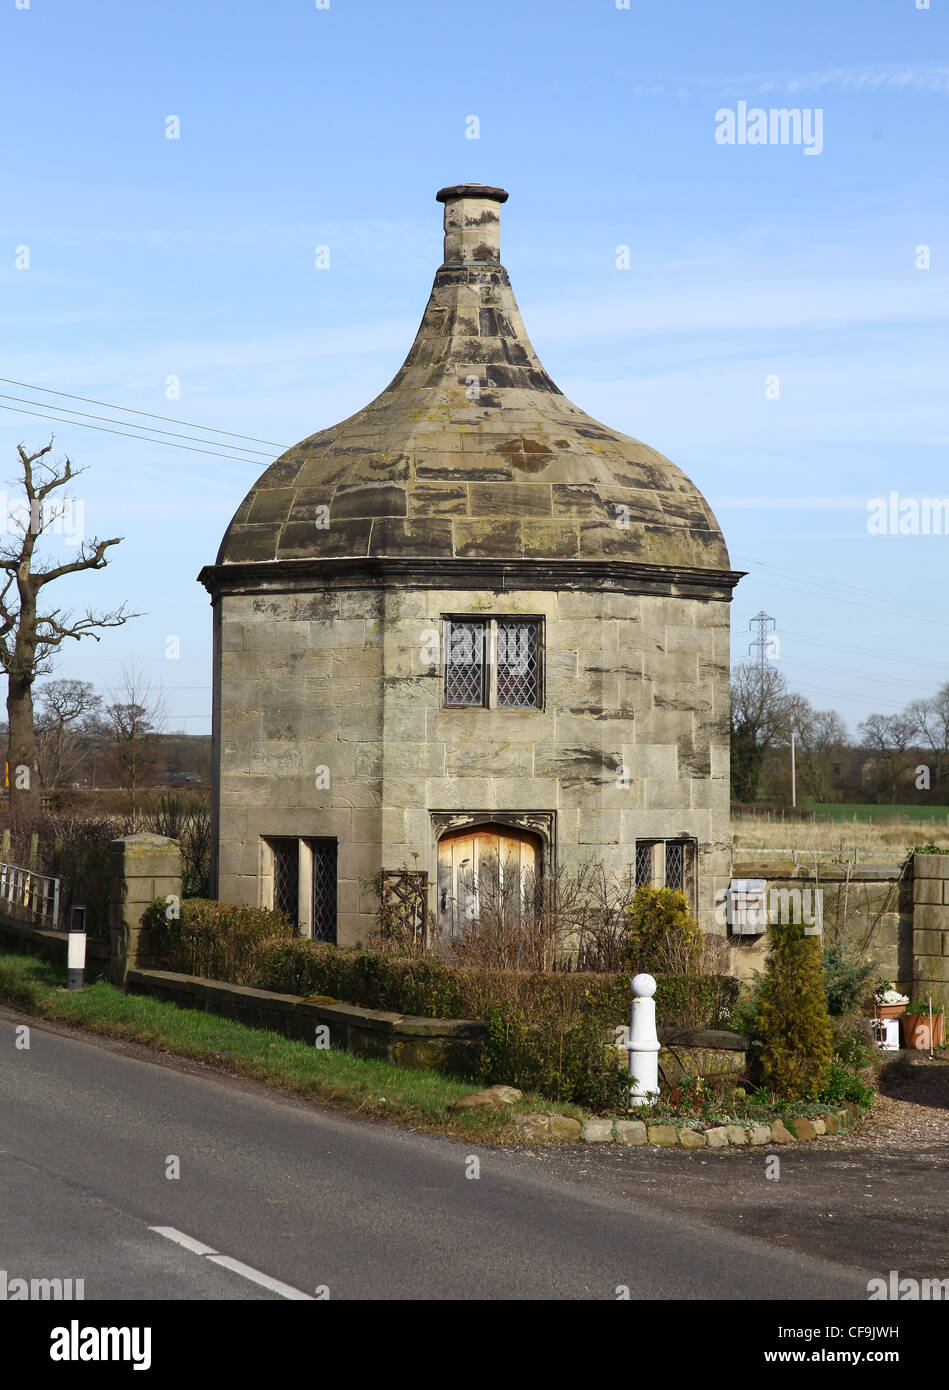 Tixall Bottle Lodge,  a curious octagonal lodge in ashlar stone with an ogee stone vaulted roof near to Stafford, England UK Stock Photo